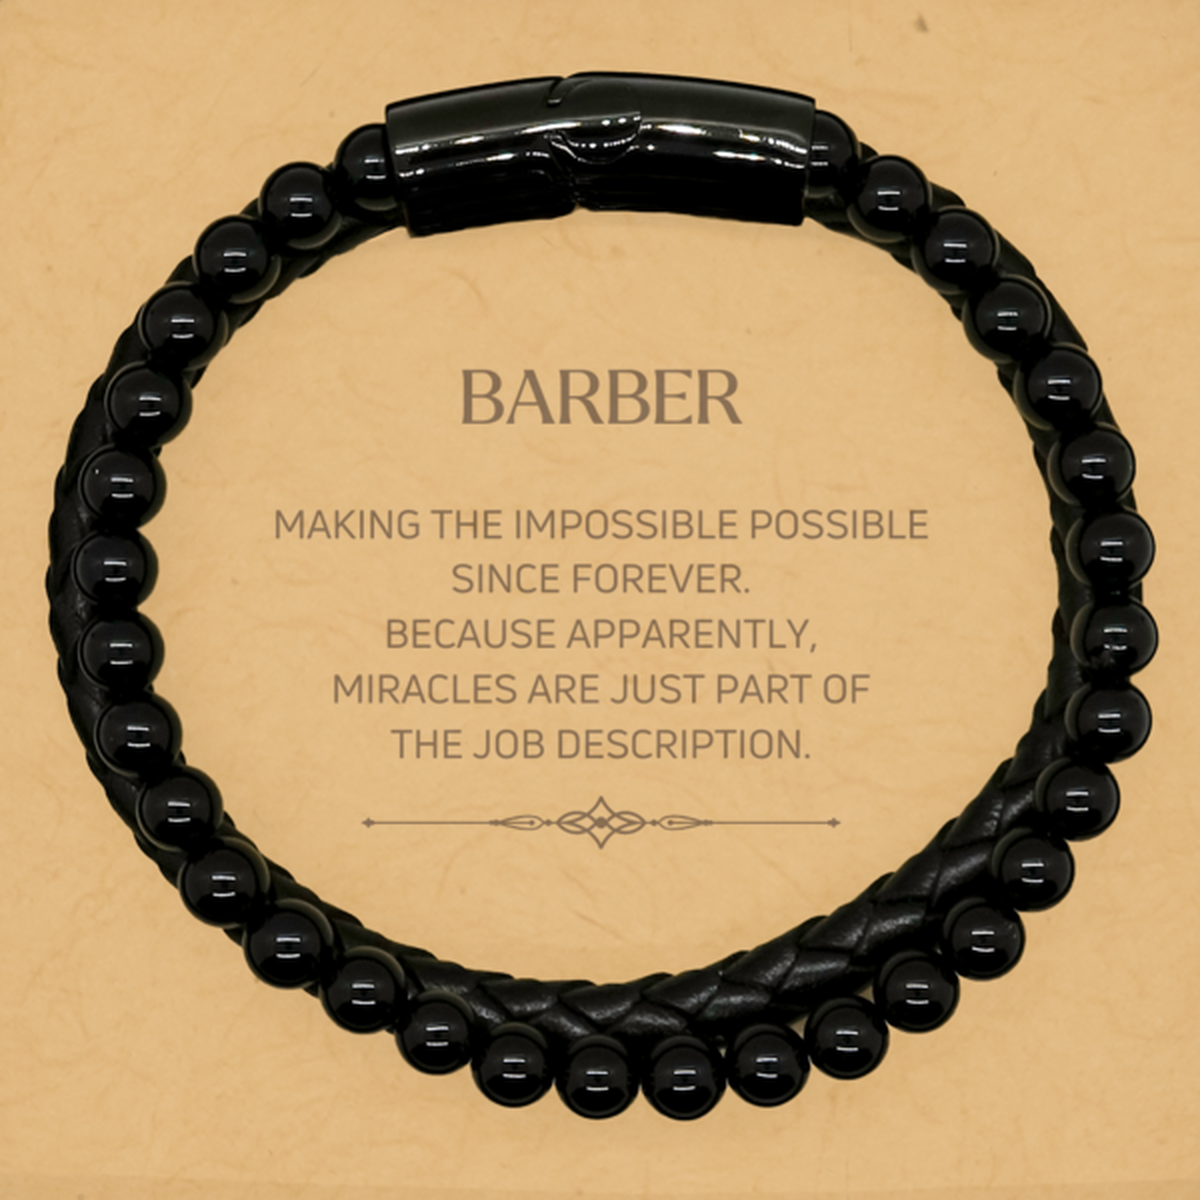 Funny Barber Gifts, Miracles are just part of the job description, Inspirational Birthday Stone Leather Bracelets For Barber, Men, Women, Coworkers, Friends, Boss